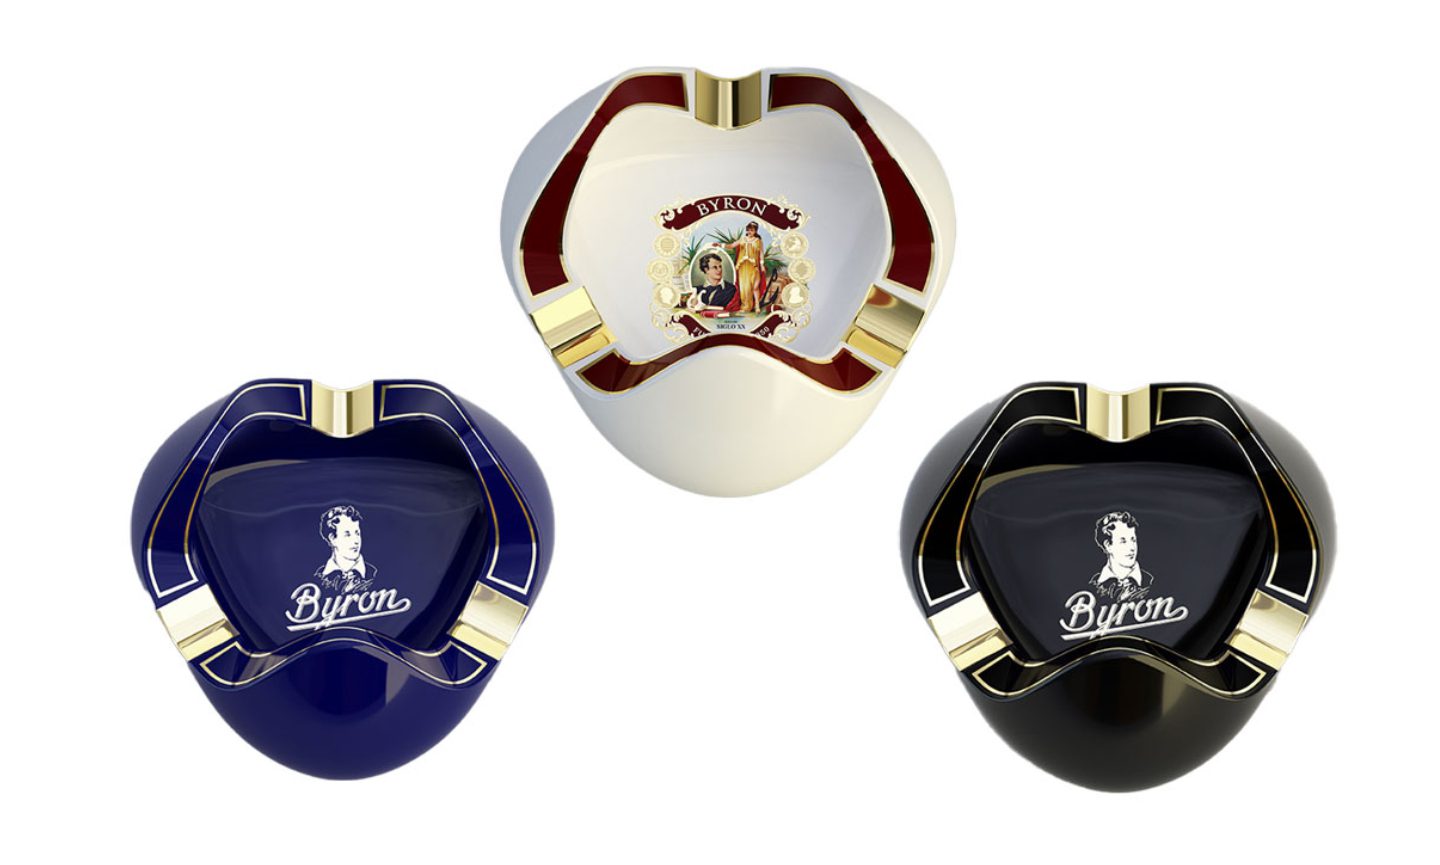 the-elegance-of-byron:-limited-edition-porcelain-ashtrays-available